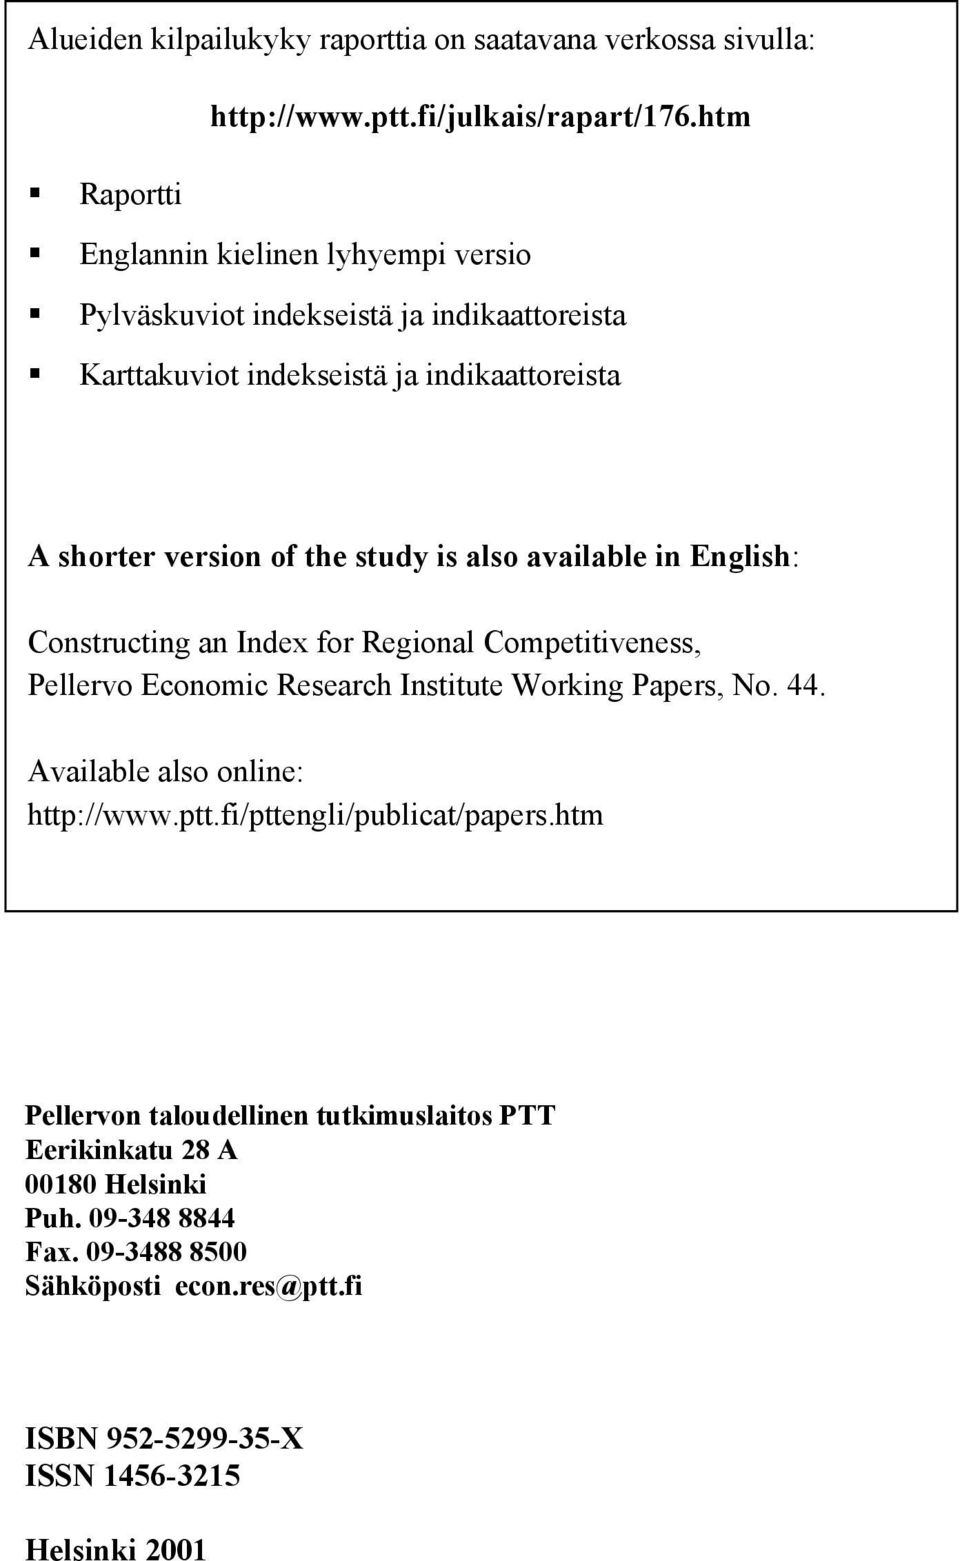 study is also available in English: Constructing an Index for Regional Competitiveness, Pellervo Economic Research Institute Working Papers, No. 44.